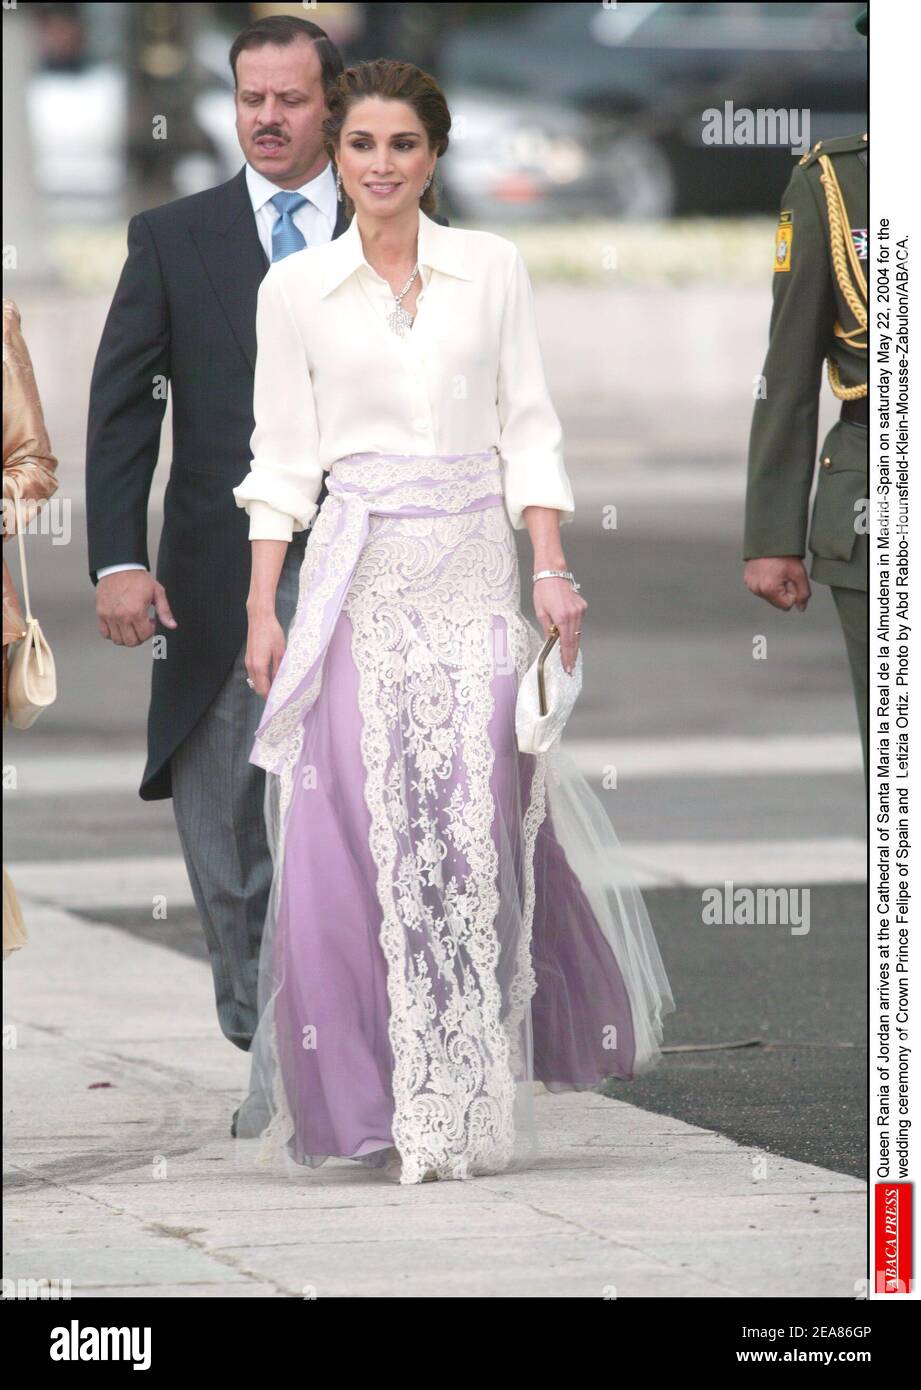 Queen Rania of Jordan arrives at the Cathedral of Santa Maria la Real de la Almudena in Madrid-Spain on saturday May 22, 2004 for the wedding ceremony of Crown Prince Felipe of Spain and Letizia Ortiz. Photo by Abd Rabbo-Hounsfield-Klein-Mousse-Zabulon/ABACA. Stock Photo